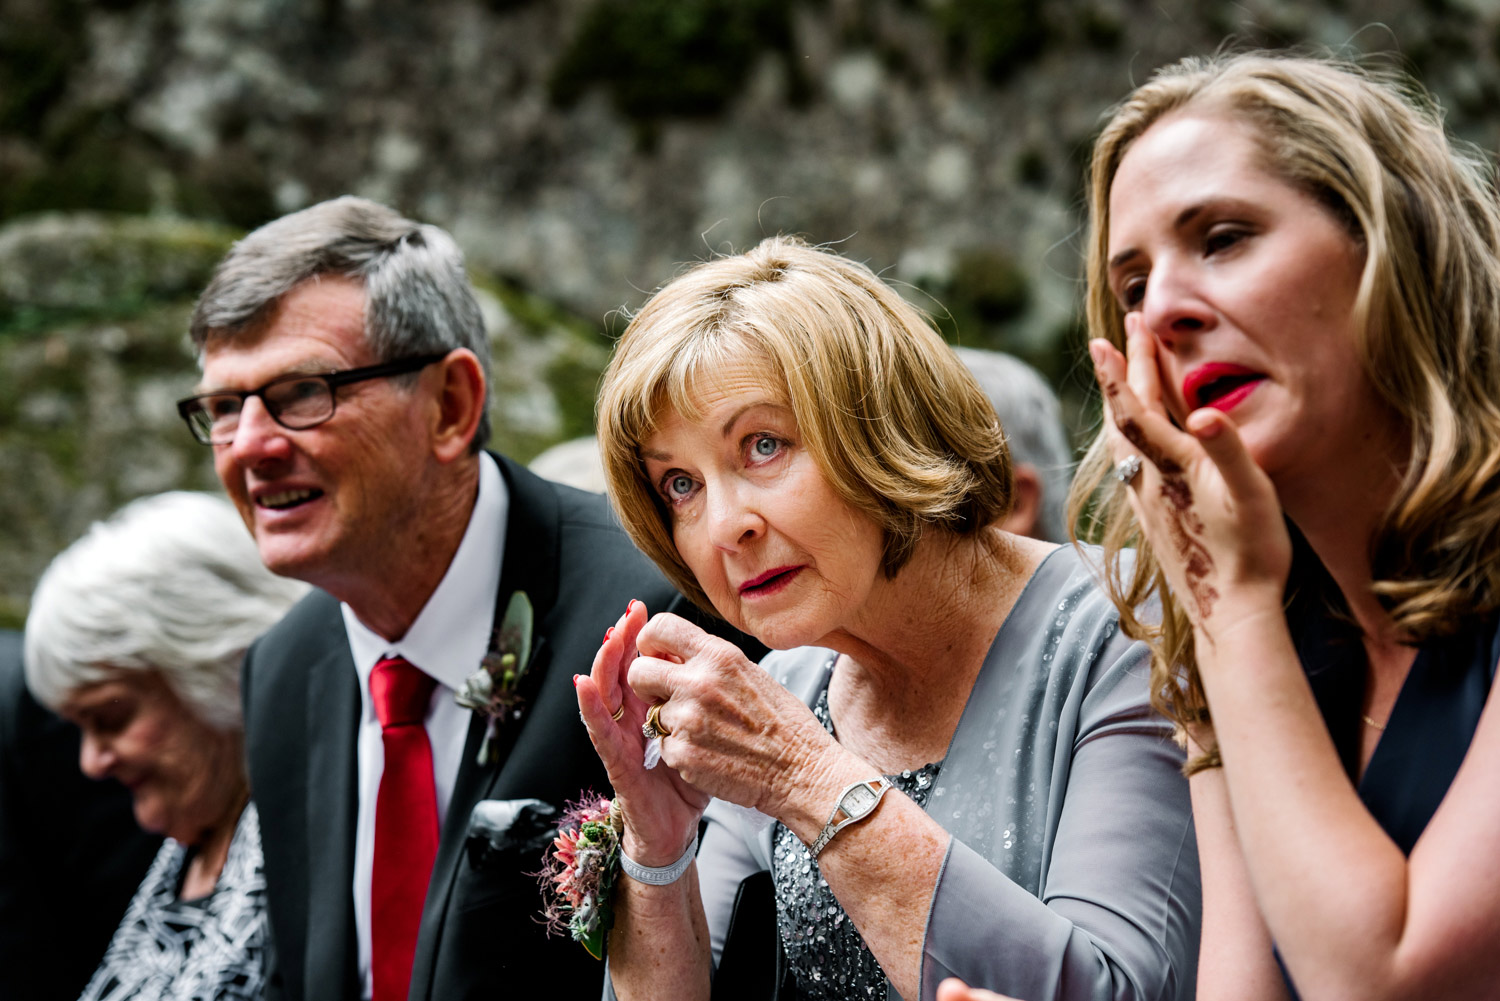 Emotional family look on during ceremony in Kangaroo Valley